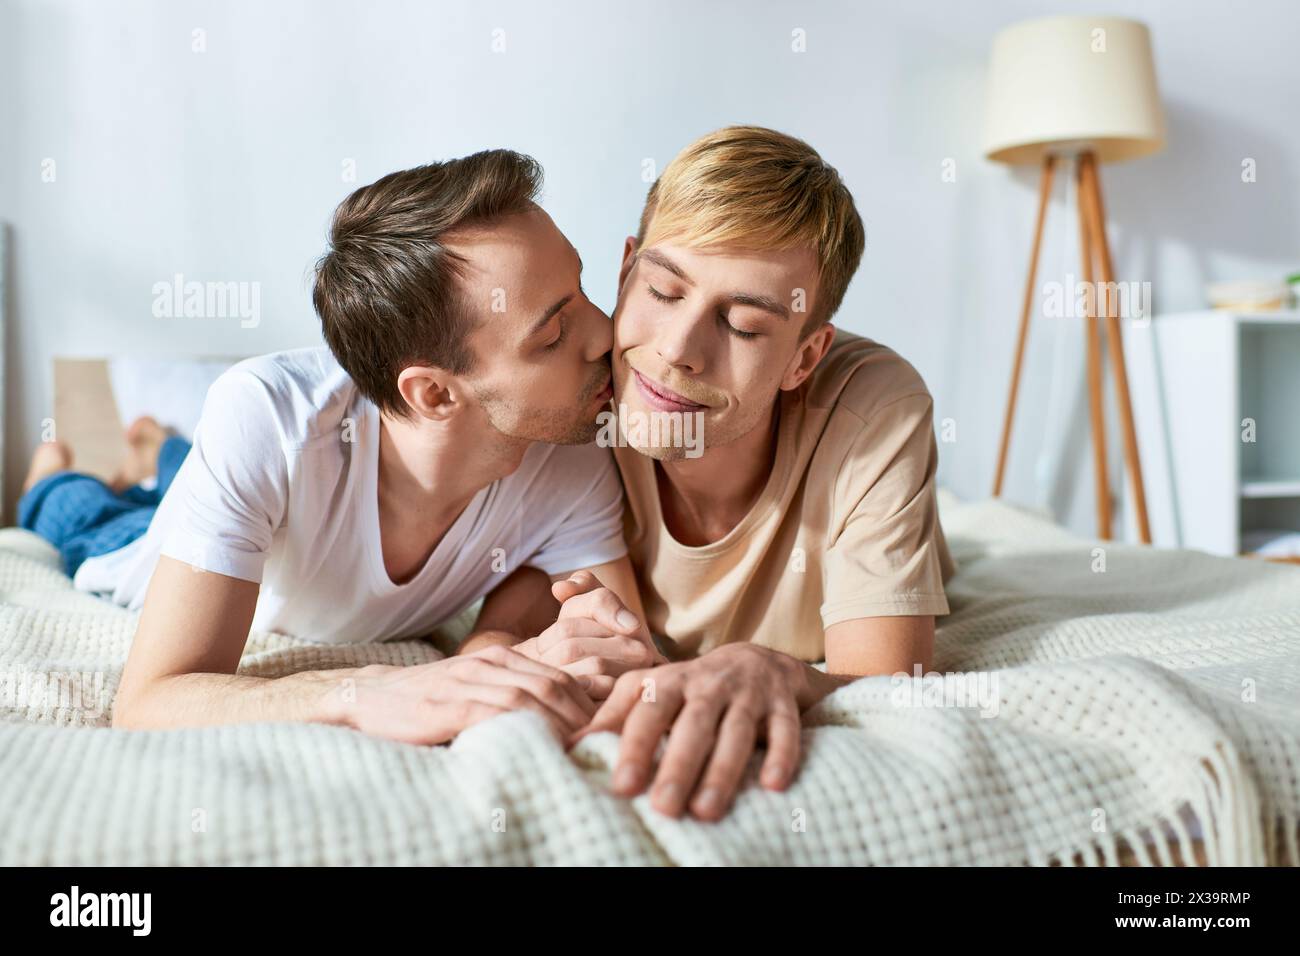 Two men laying on a bed, sharing a passionate kiss. Stock Photo